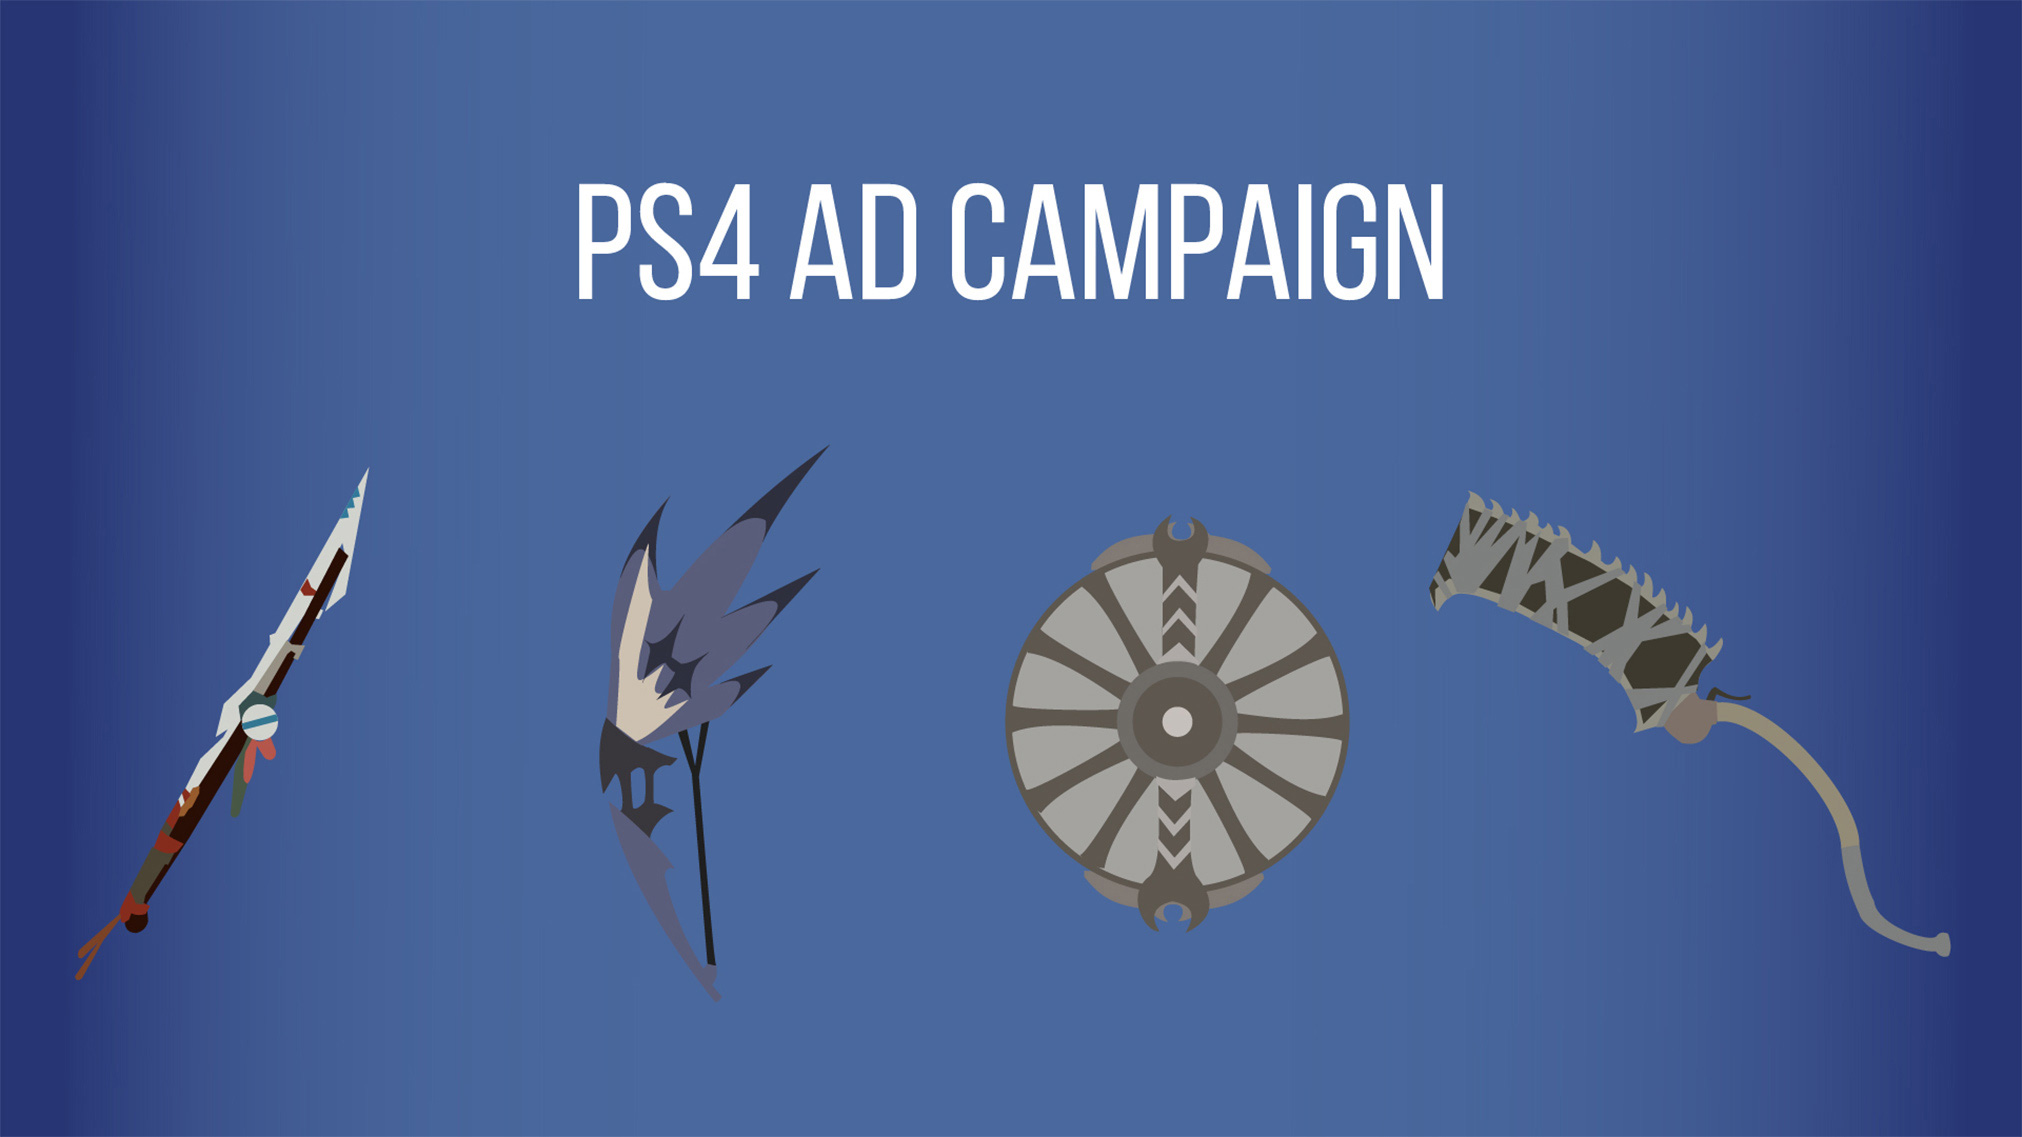 Branding. Create a fictional brand experience to advertise Sony's PS4.
